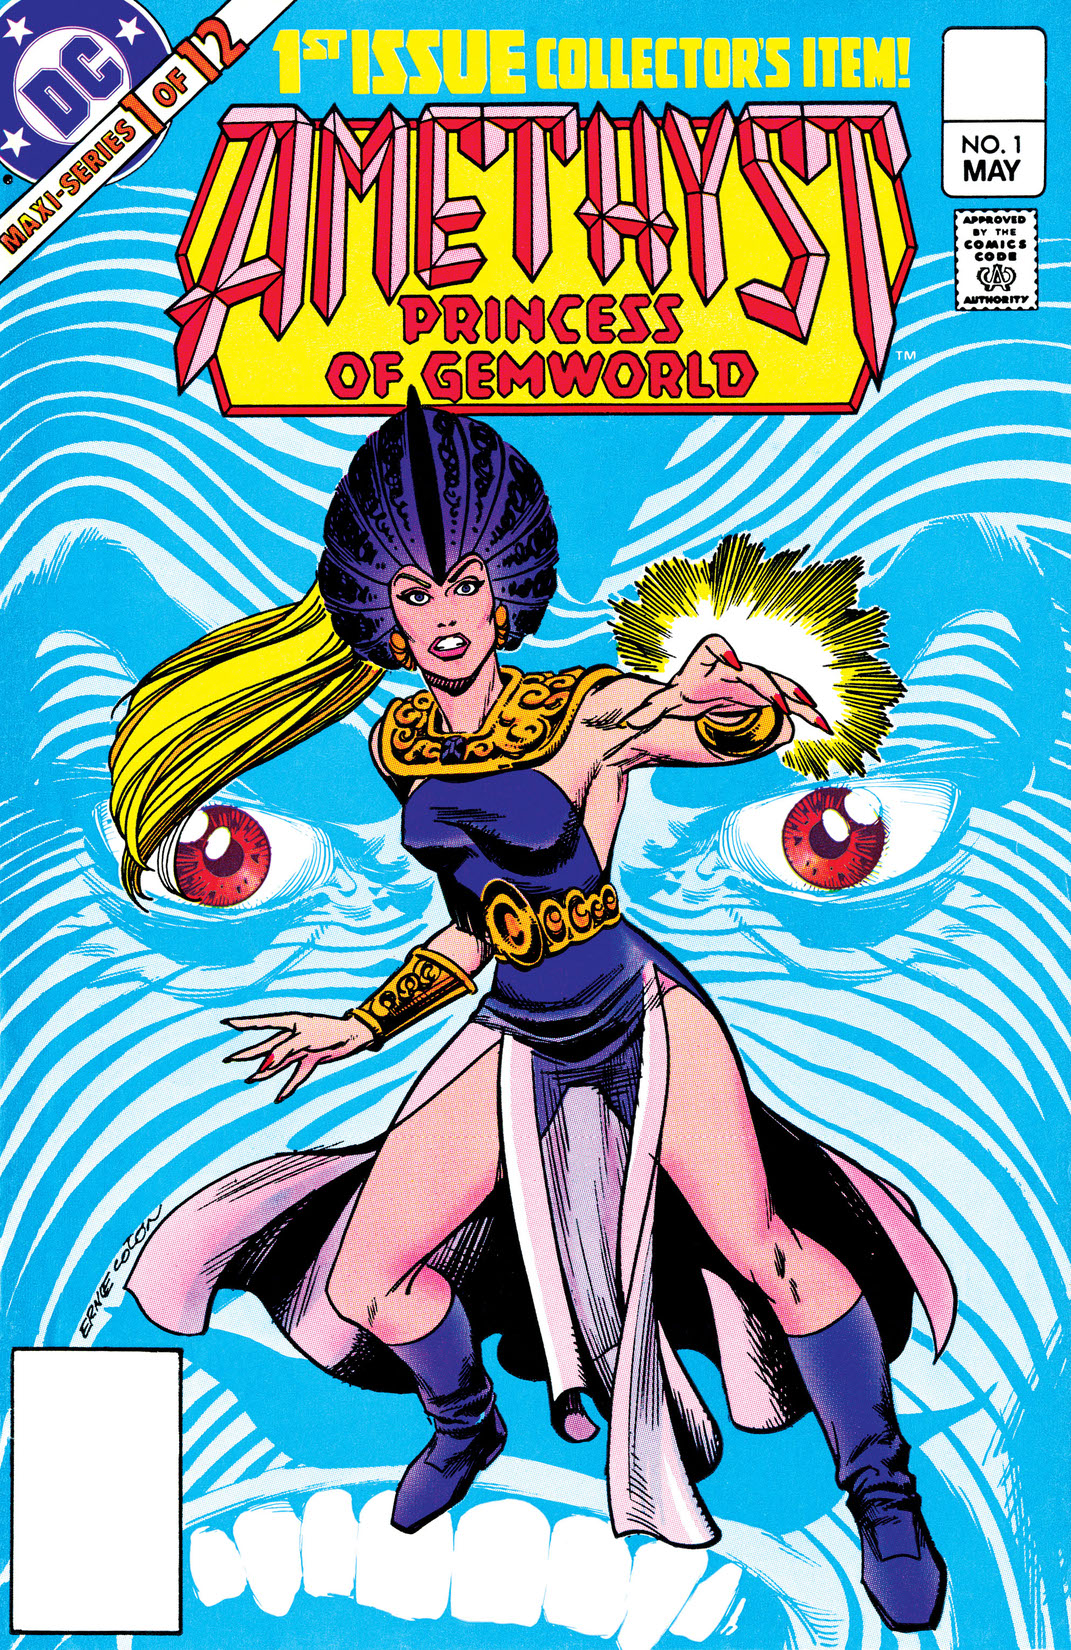 Amethyst: Princess of Gemworld (1983-) #1 preview images